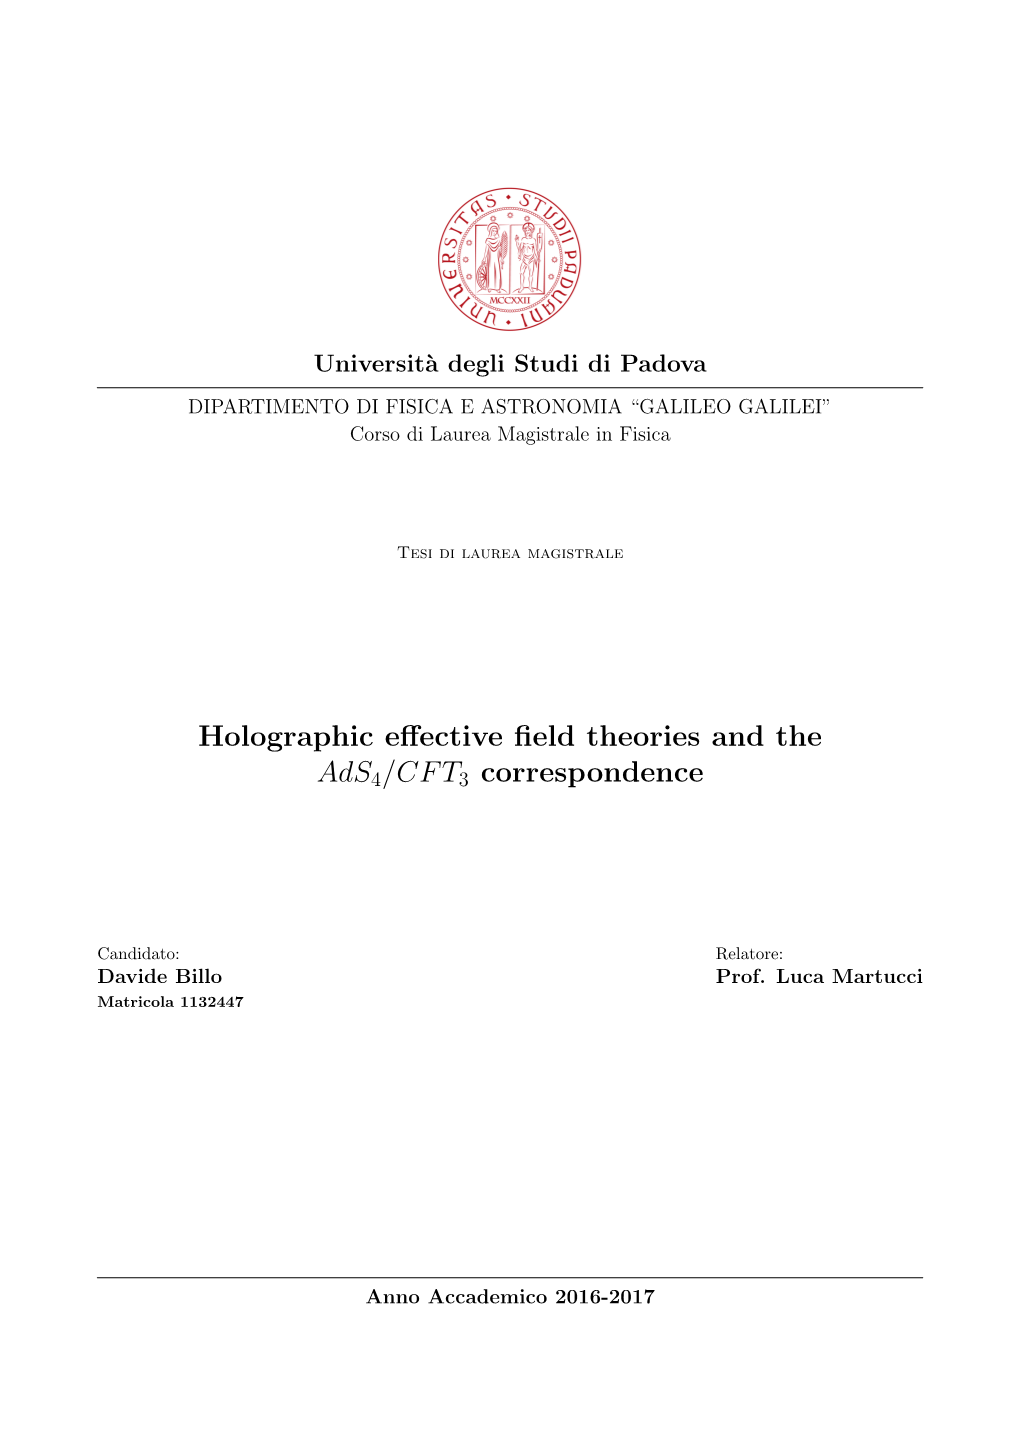 Holographic Effective Field Theories and the Ads4/CFT3 Correspondence